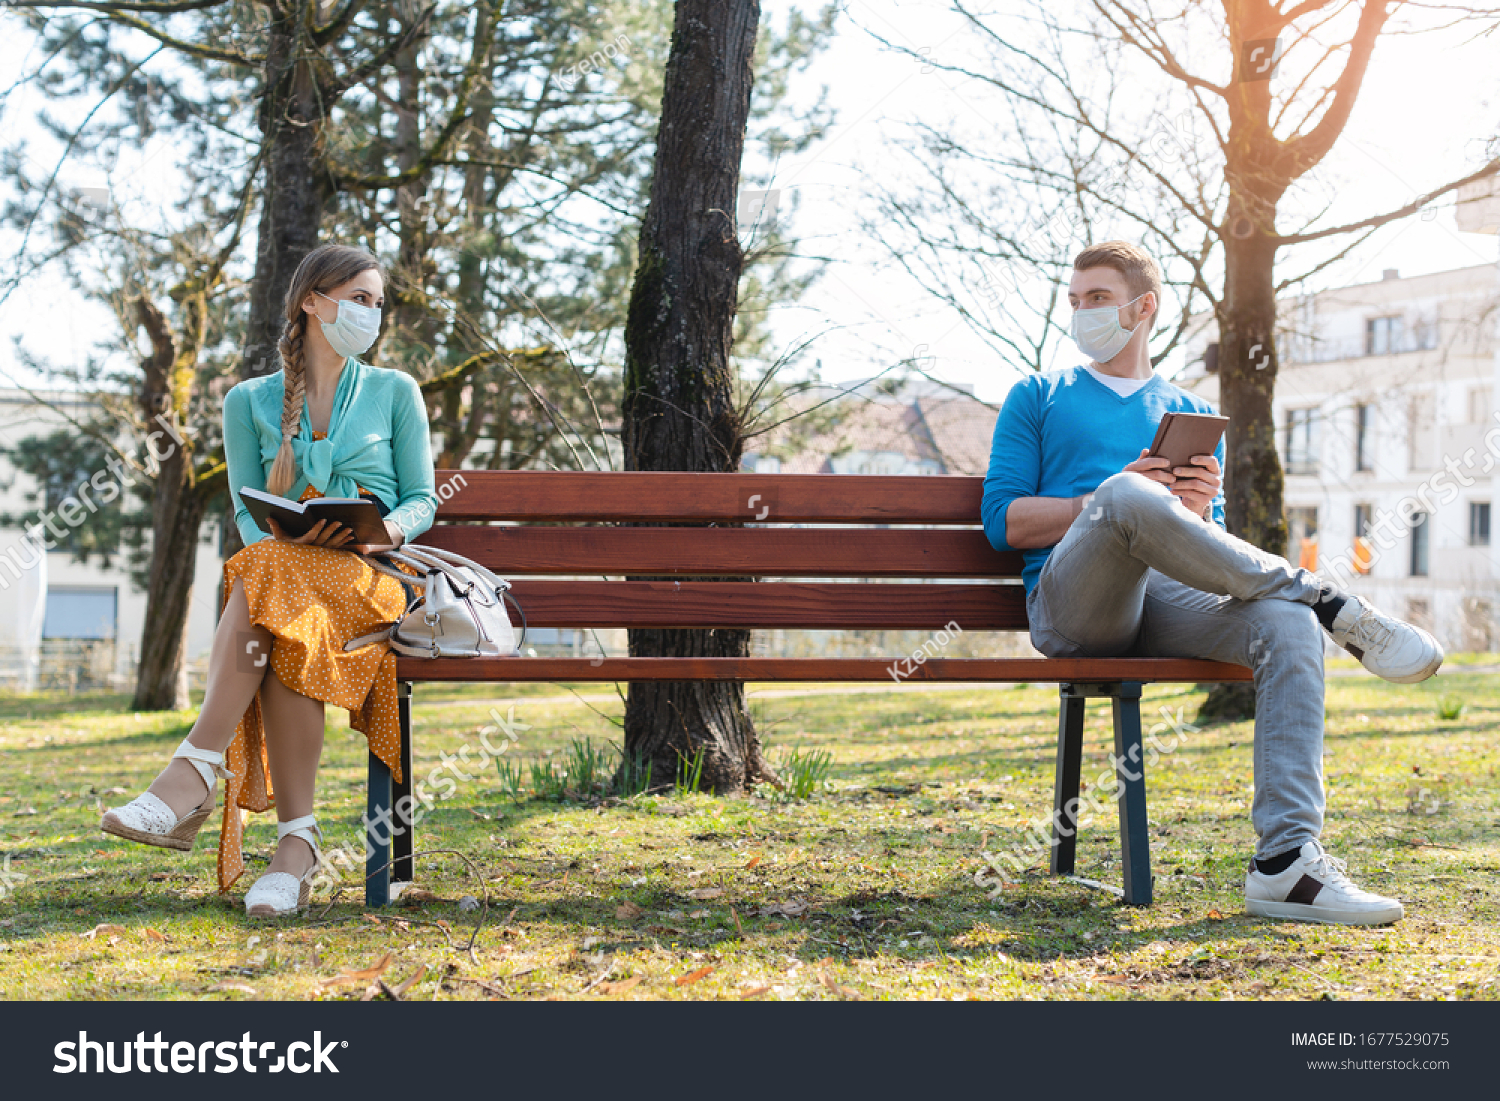 Woman and man in social distancing sitting on bench in park #1677529075